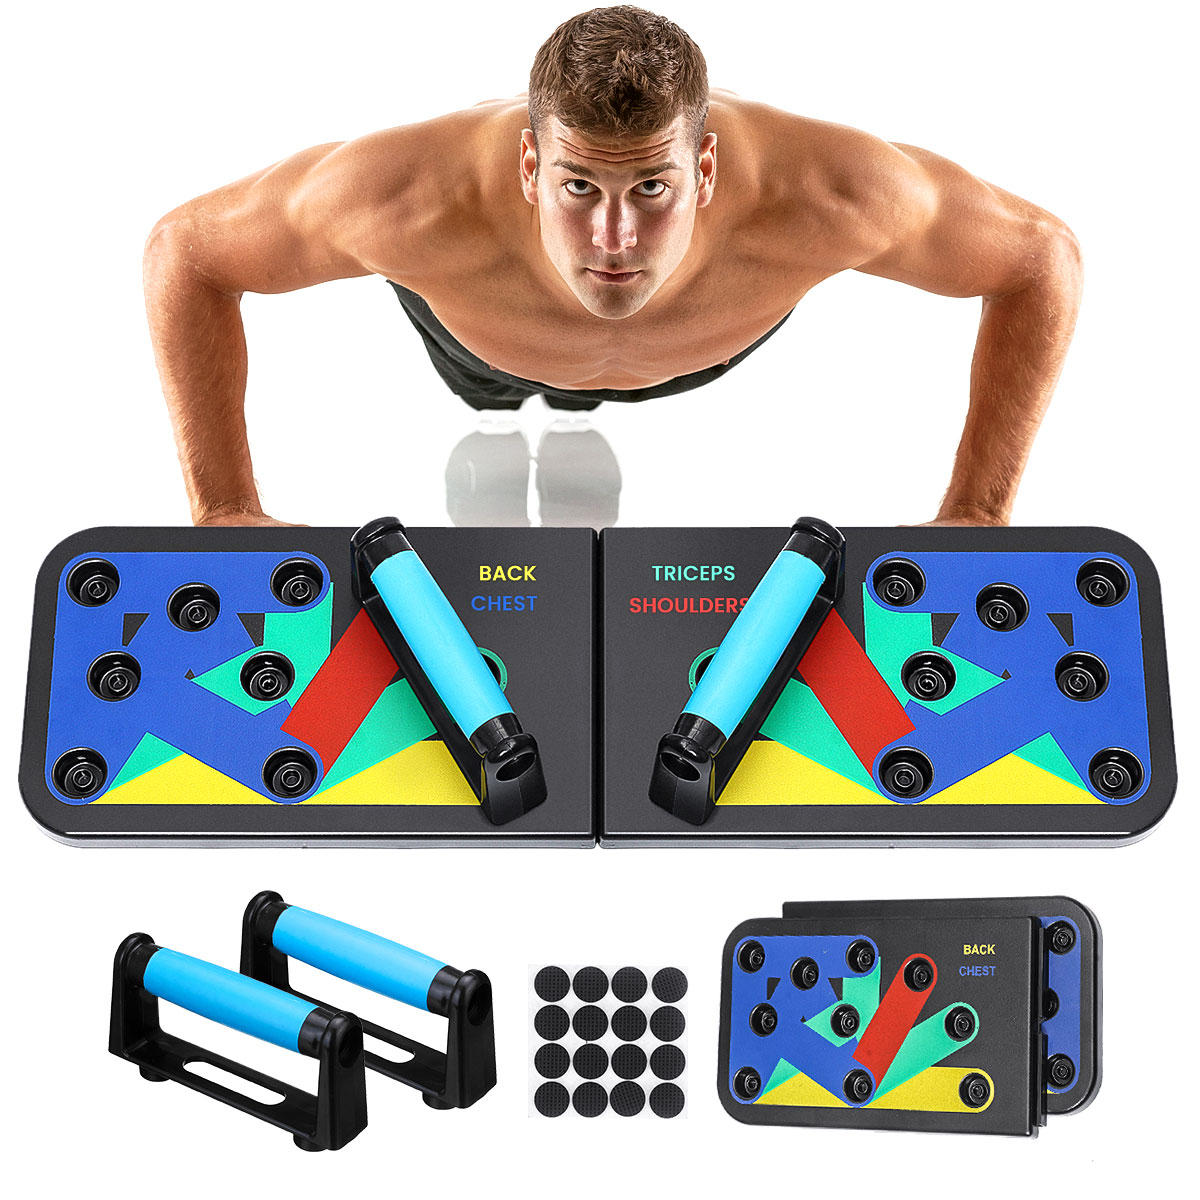 12 in 1 Push Up Board with Instruction Print Body Building Fitness Exercise Tools Men Women Push-up Stands For Gym Body Training